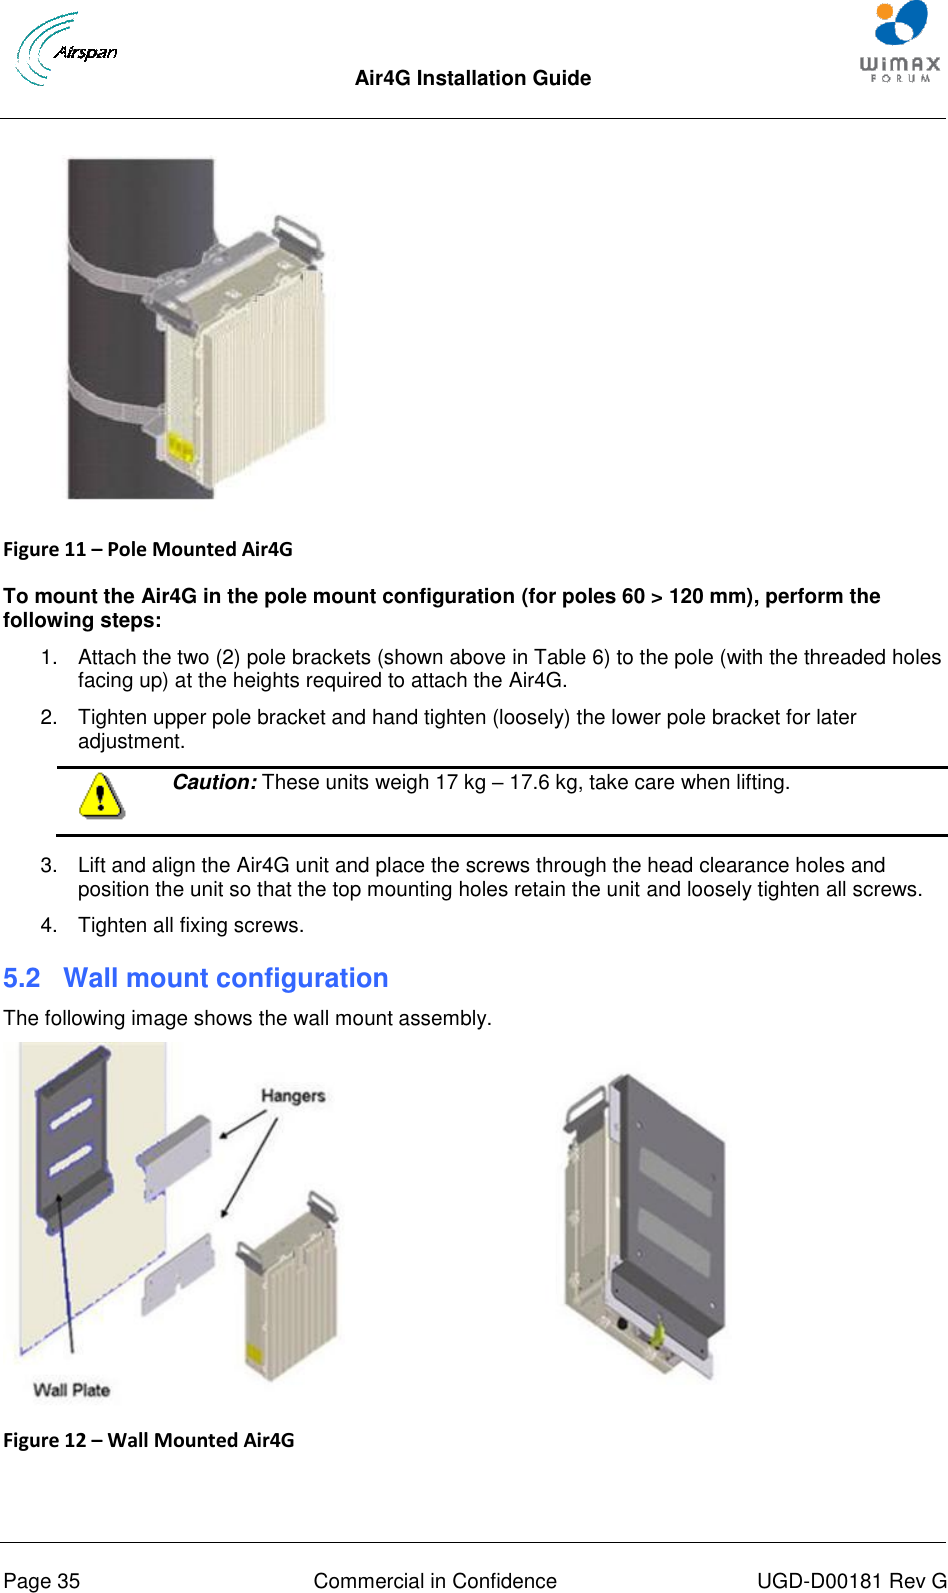  Air4G Installation Guide       Page 35  Commercial in Confidence  UGD-D00181 Rev G   Figure 11 – Pole Mounted Air4G   To mount the Air4G in the pole mount configuration (for poles 60 &gt; 120 mm), perform the following steps: 1.  Attach the two (2) pole brackets (shown above in Table 6) to the pole (with the threaded holes facing up) at the heights required to attach the Air4G. 2.  Tighten upper pole bracket and hand tighten (loosely) the lower pole bracket for later adjustment.  Caution: These units weigh 17 kg – 17.6 kg, take care when lifting.  3.  Lift and align the Air4G unit and place the screws through the head clearance holes and position the unit so that the top mounting holes retain the unit and loosely tighten all screws. 4.  Tighten all fixing screws. 5.2  Wall mount configuration The following image shows the wall mount assembly.  Figure 12 – Wall Mounted Air4G   